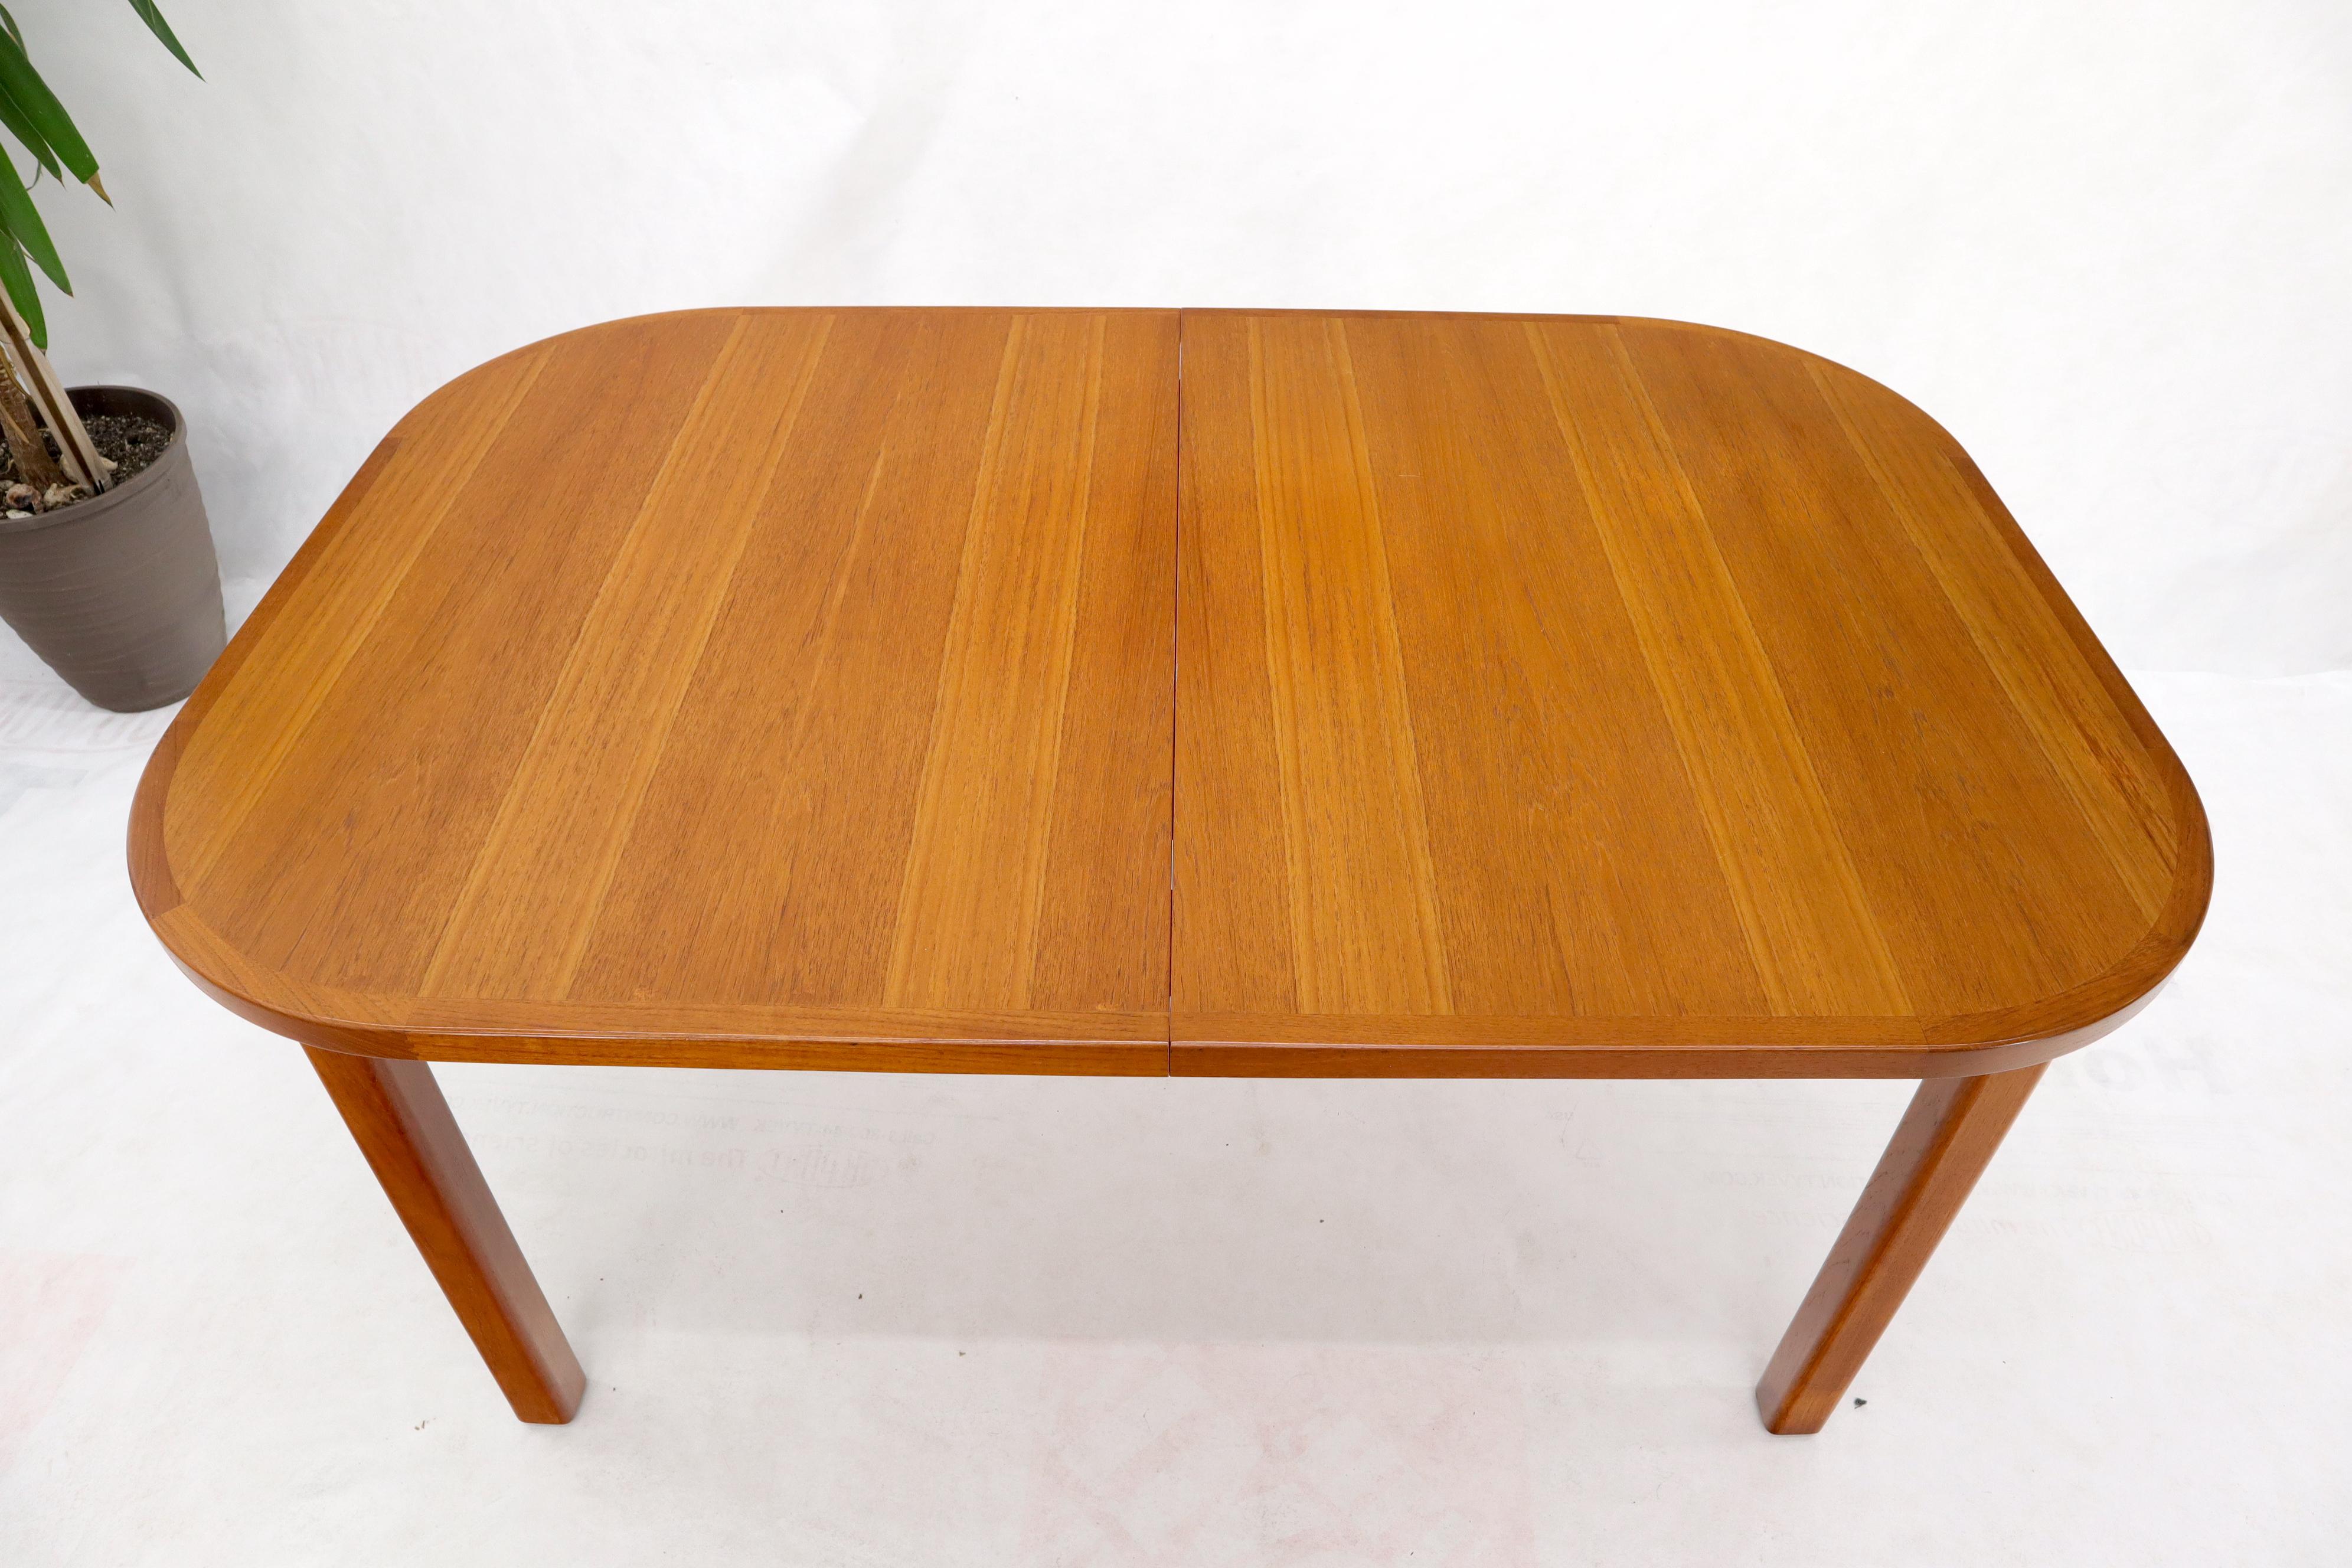 rectangle table with rounded corners